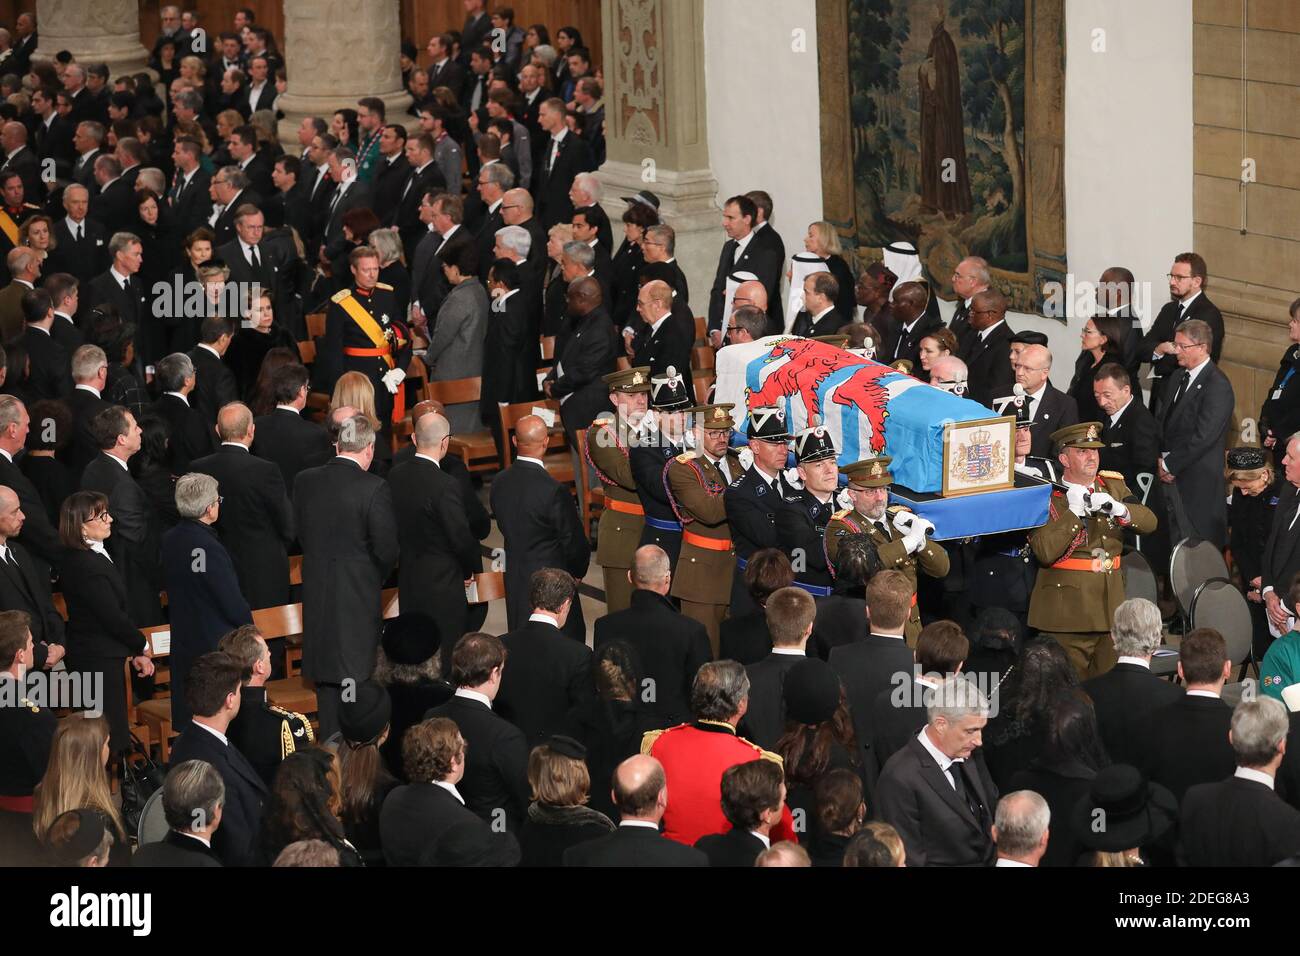 Royal family of Luxembourg at funeral of Grand Duke Jean of Luxembourg at Cathedral Notre-Dame of Luxembourg in Luxembourg City, Luxembourg on May 4, 2019. Photo by Guy Wolff/Luxemburger Wort/Pool/ABACAPRESS.COM Stock Photo